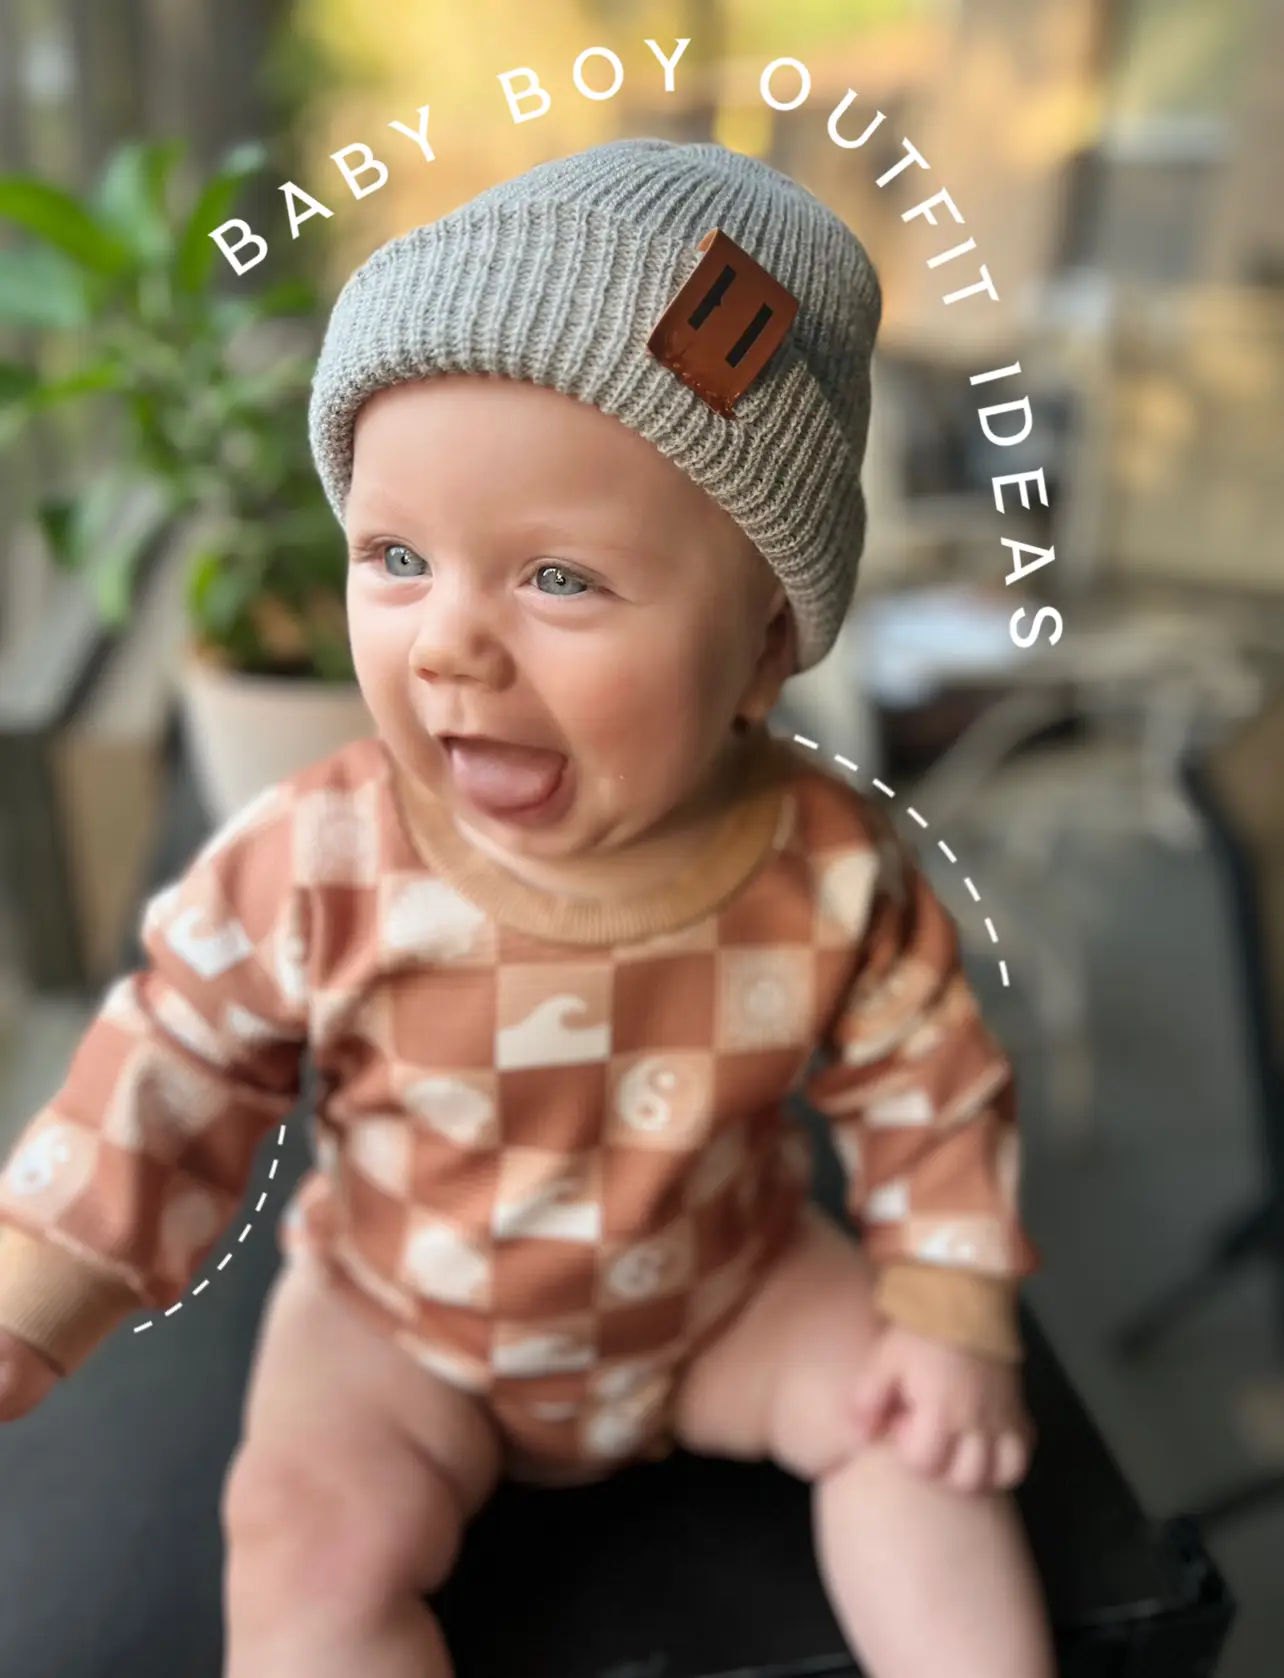 newborn baby boy picture outfits